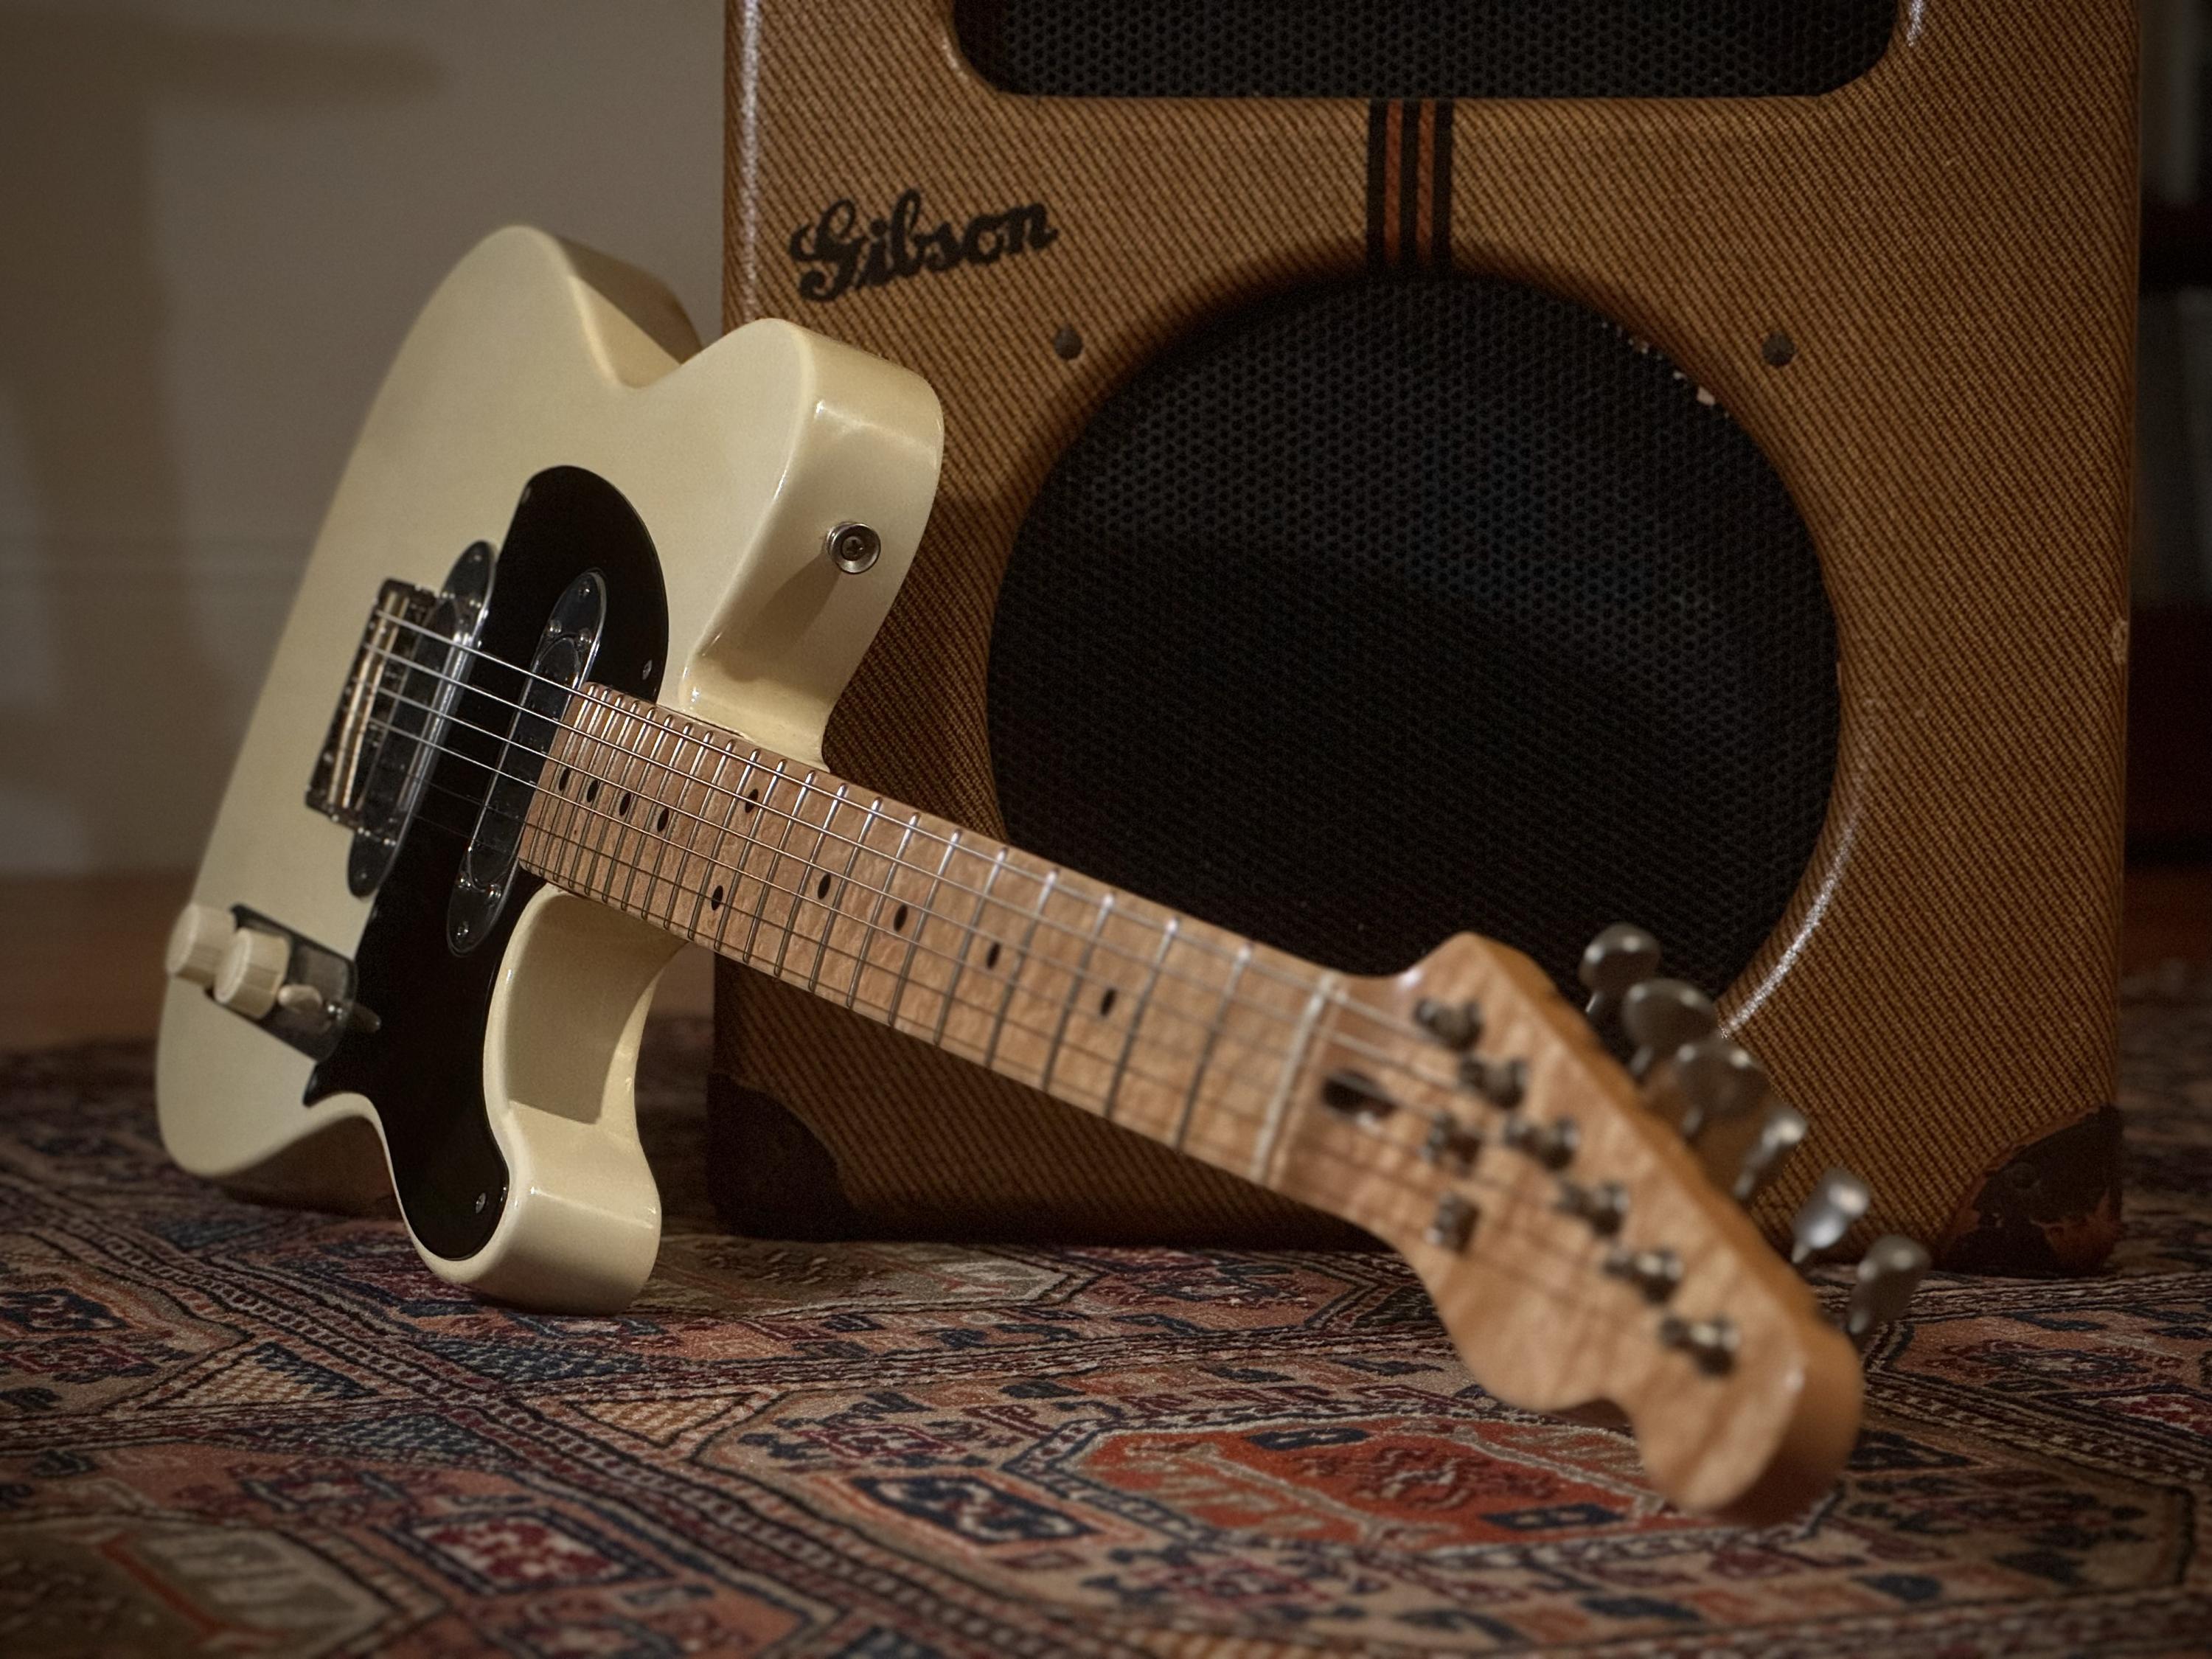 Telecaster Love Thread, No Archtops Allowed-img_9664-jpg